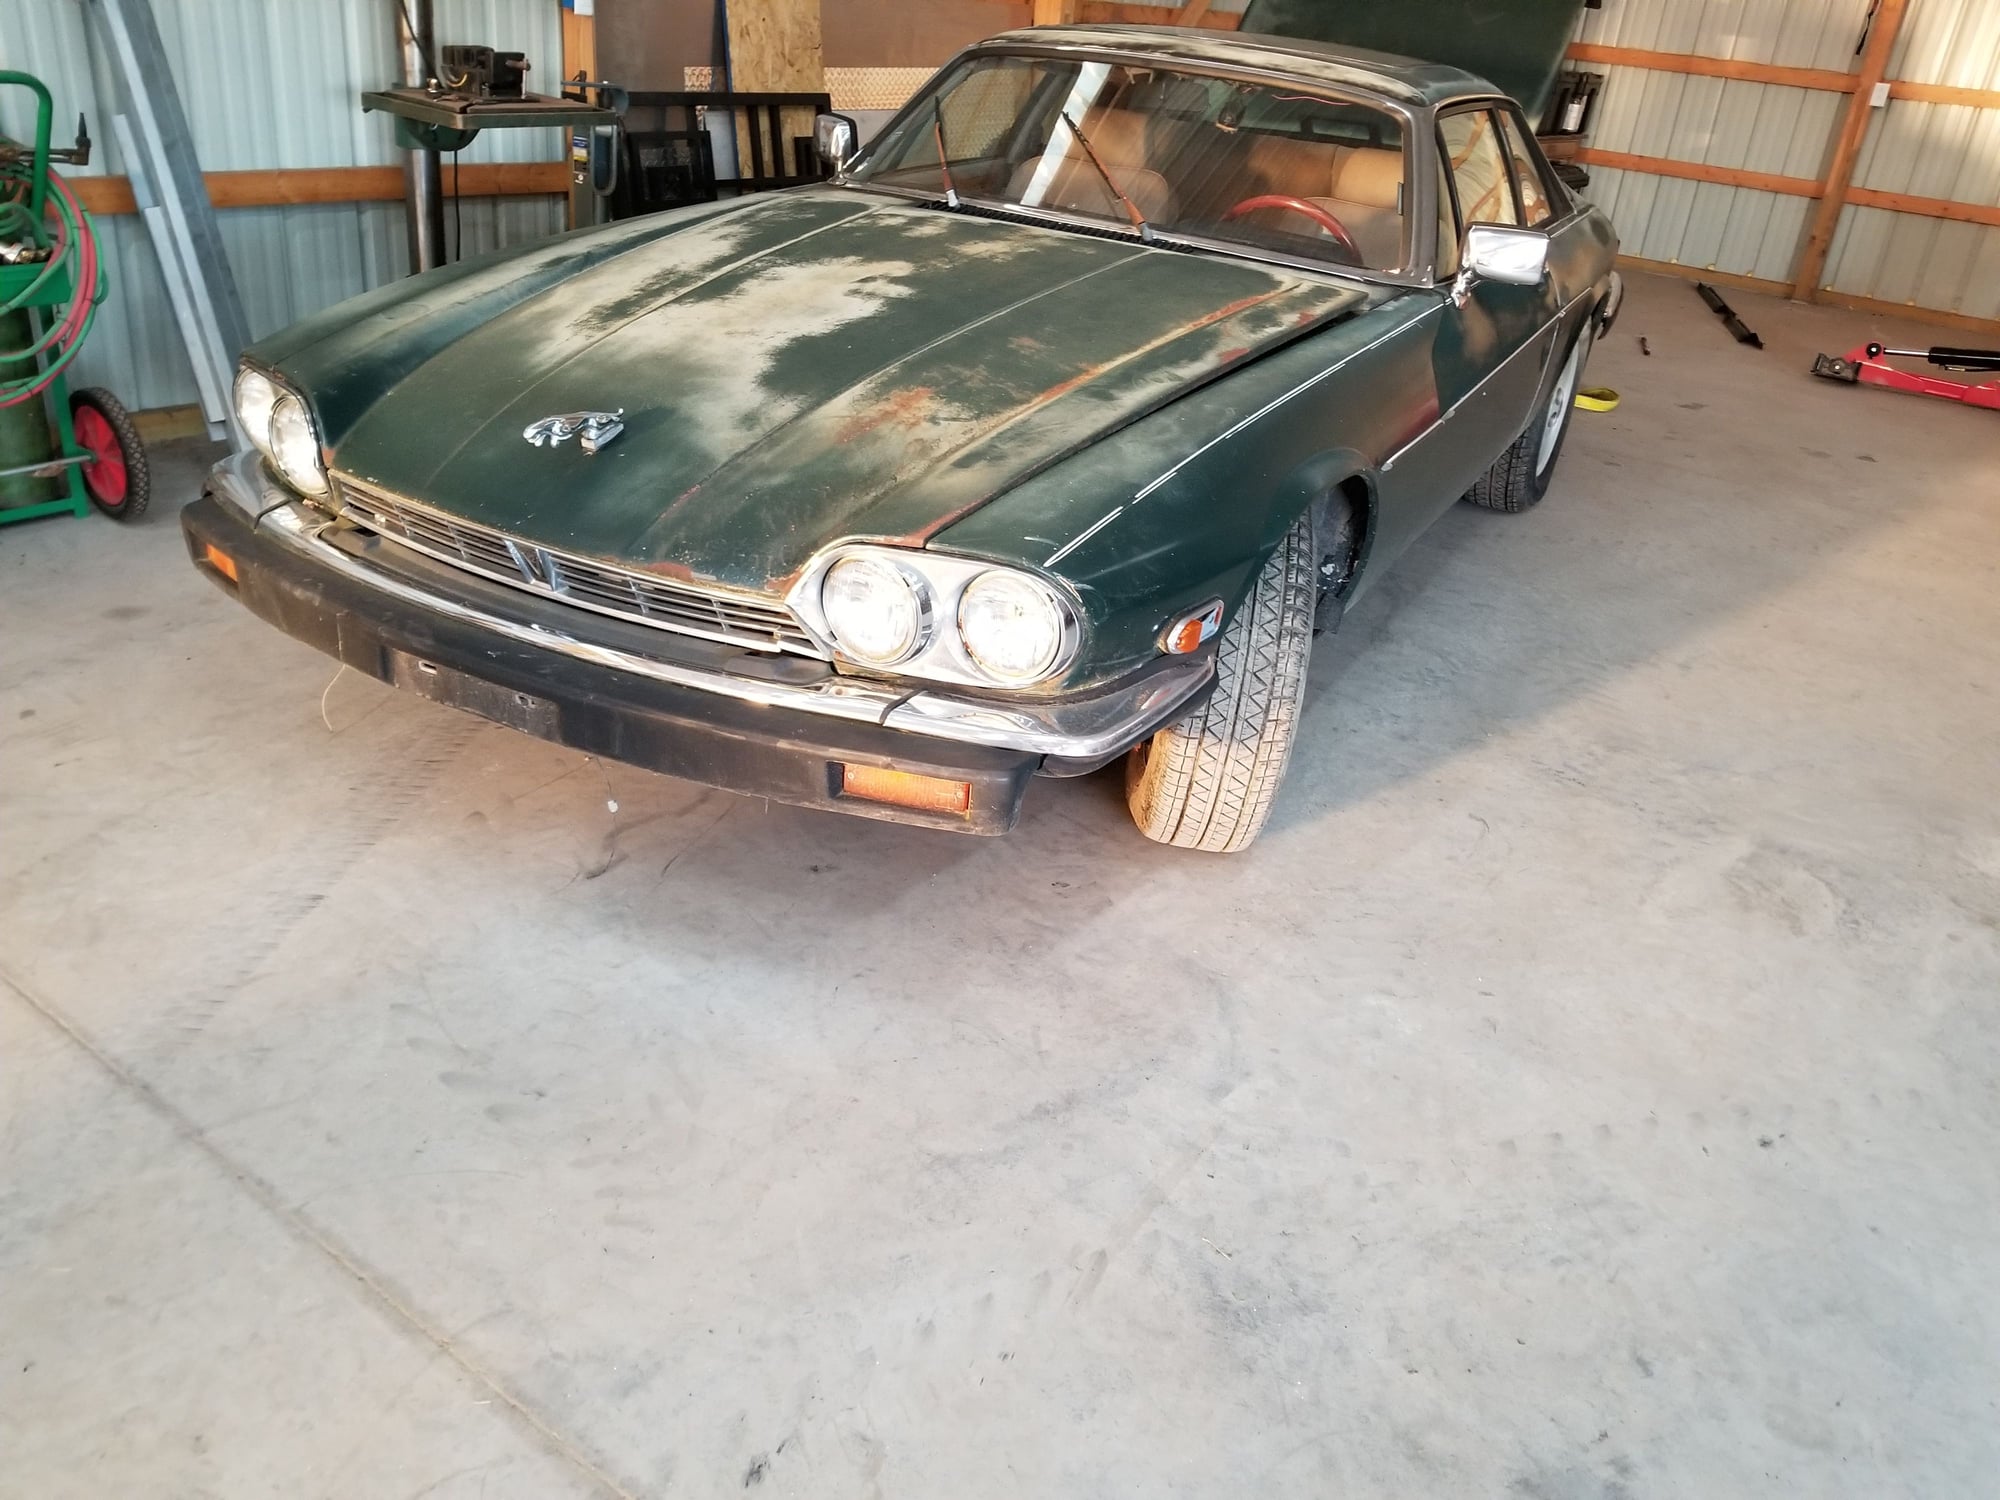 1986 Jaguar XJ12 - 1986 xjs v12 full part out - Used - VIN Sajnv5844gc129719 - 74,000 Miles - 12 cyl - 2WD - Automatic - Coupe - Other - York, PA 17325, United States